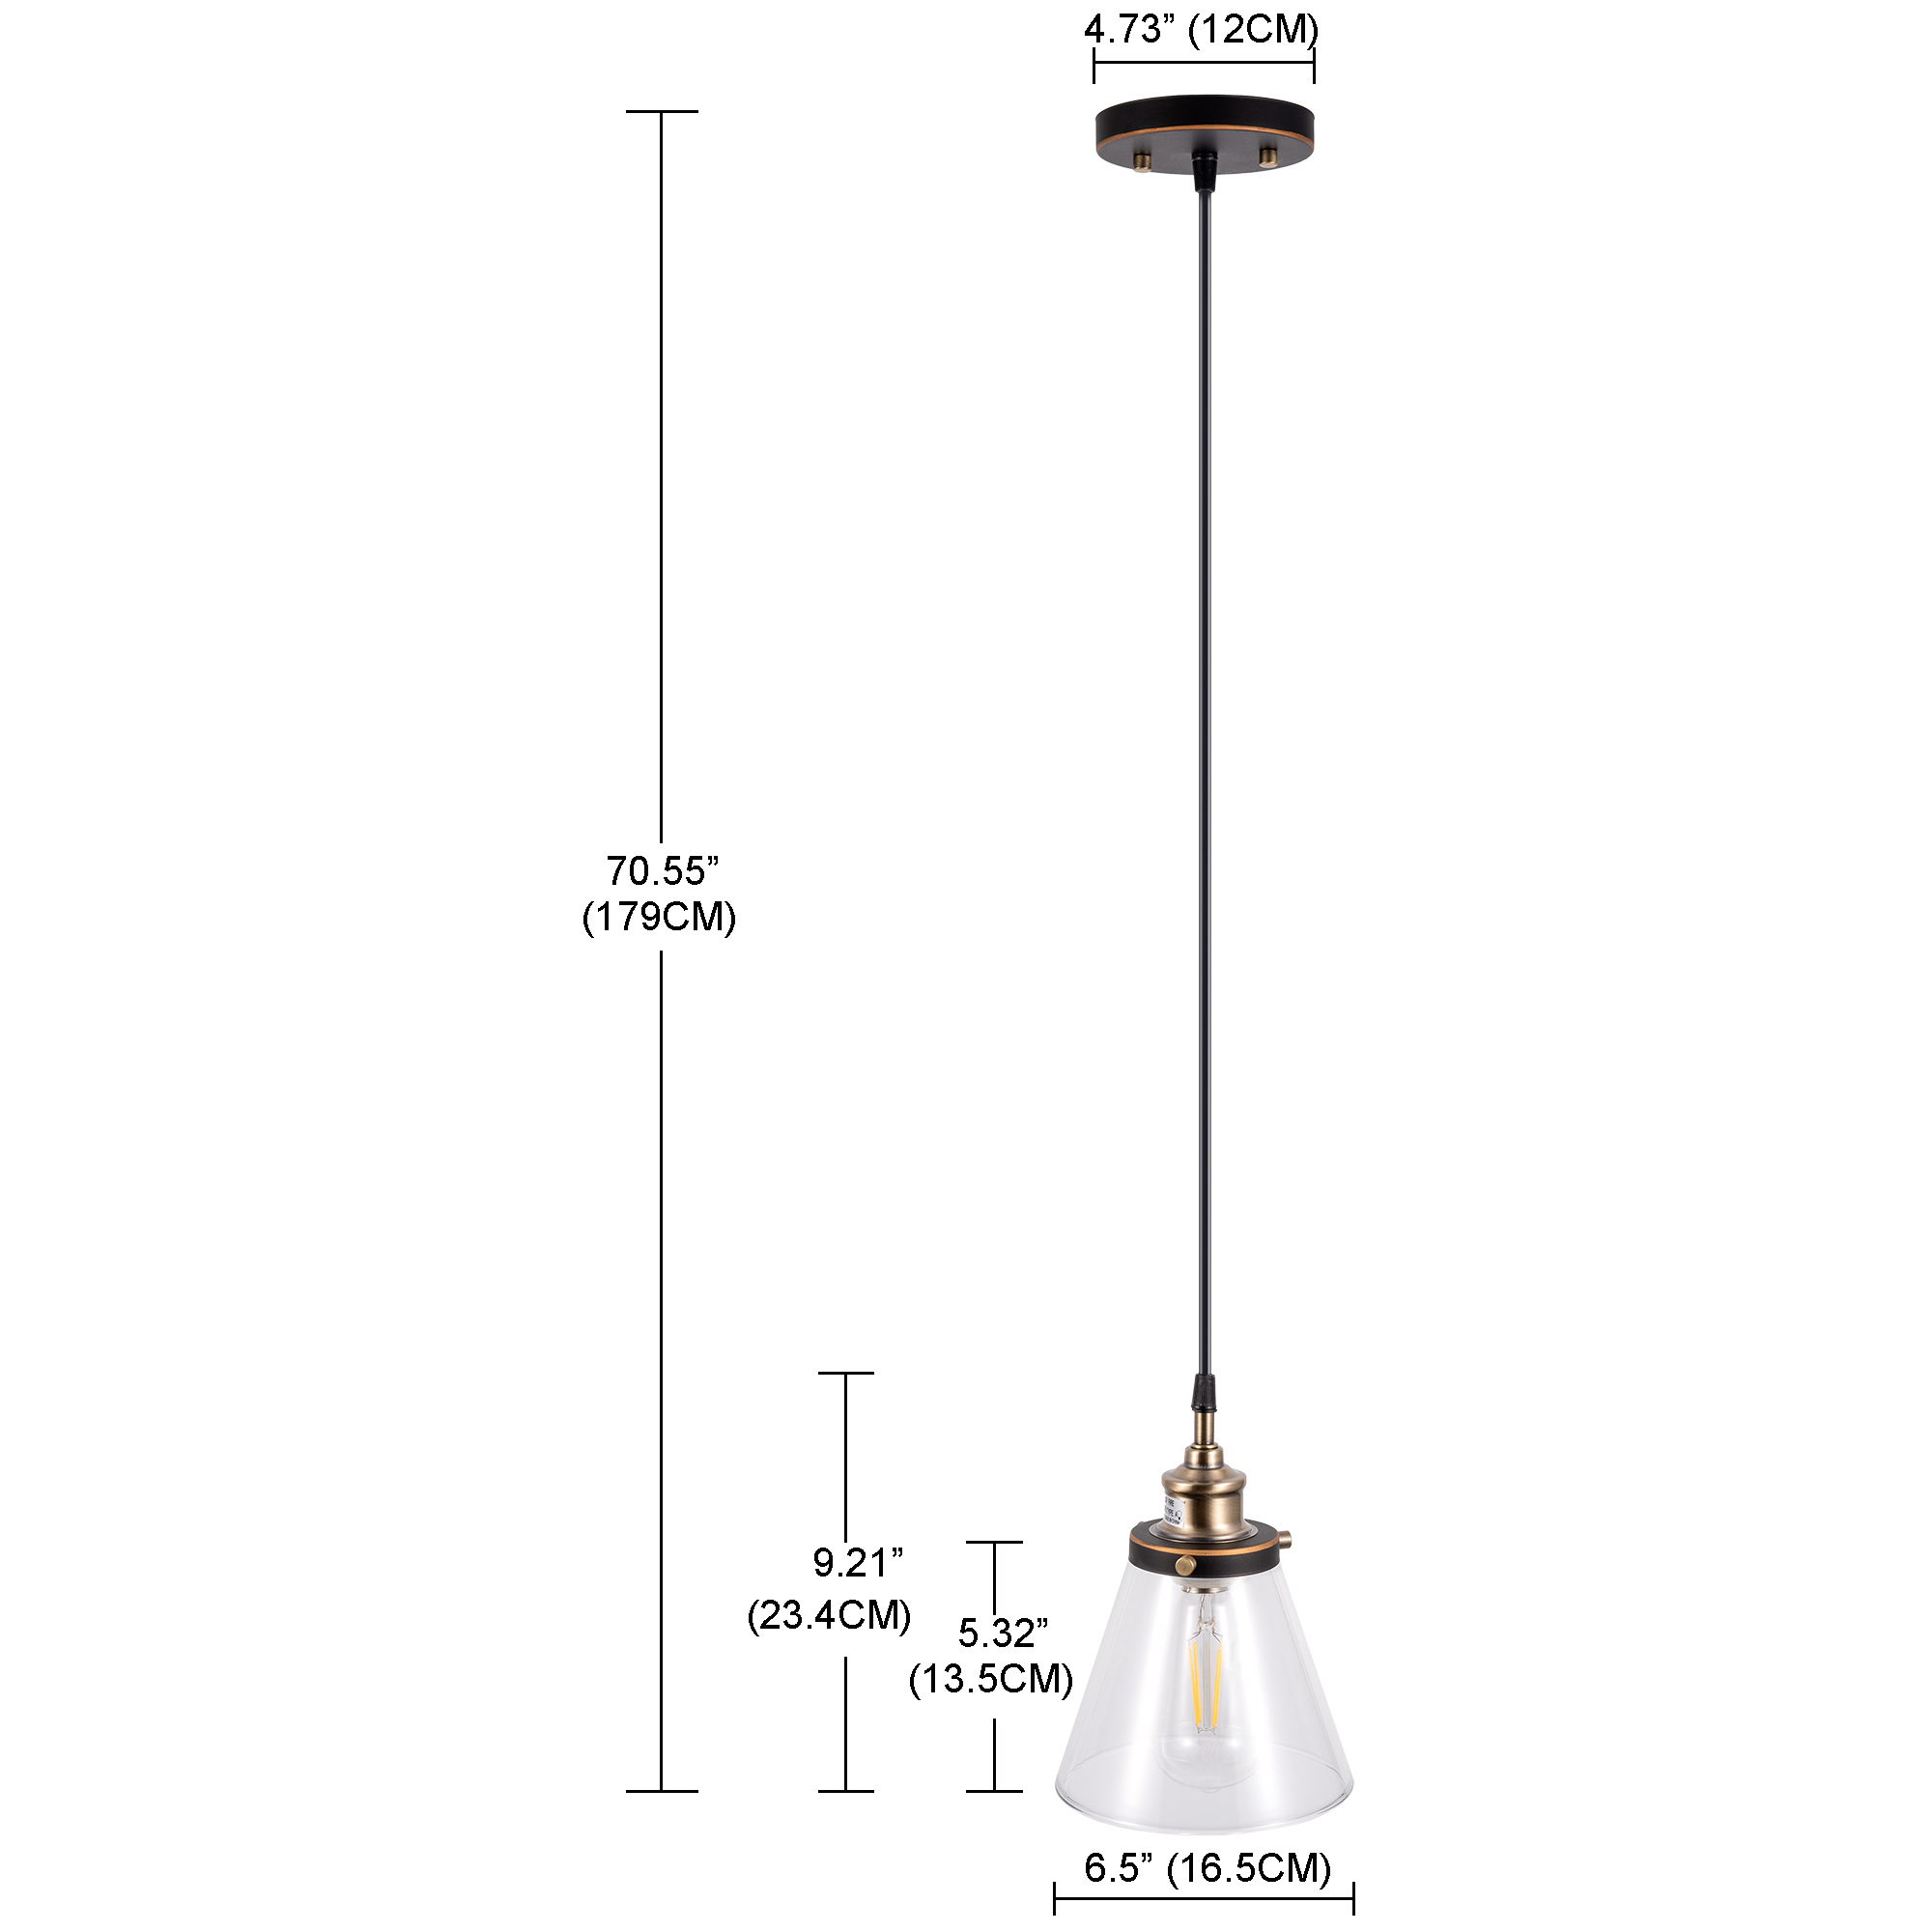 Gruenlich Pendant Lighting Fixture for Kitchen and Dining Room, Hanging Ceiling Lighting Fixture, E26 Medium Base, Metal Construction with Clear Glass, Bulb not Included, 1-Pack